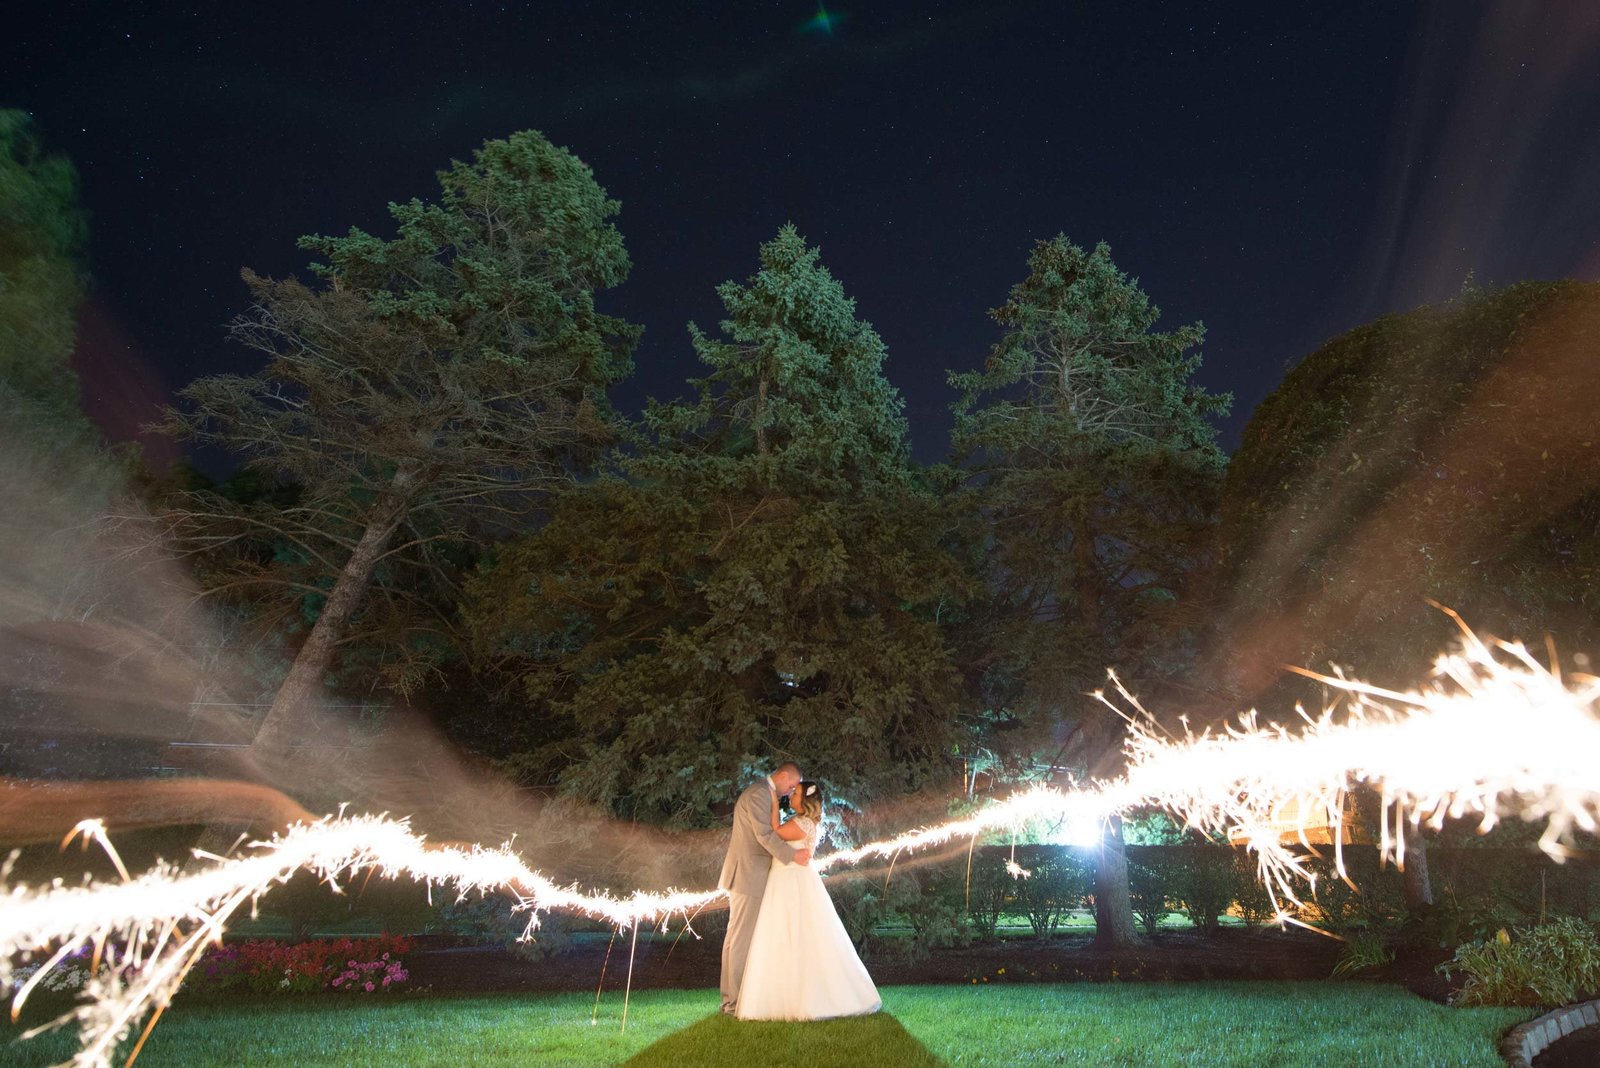 Sparkler night photo at East Wind